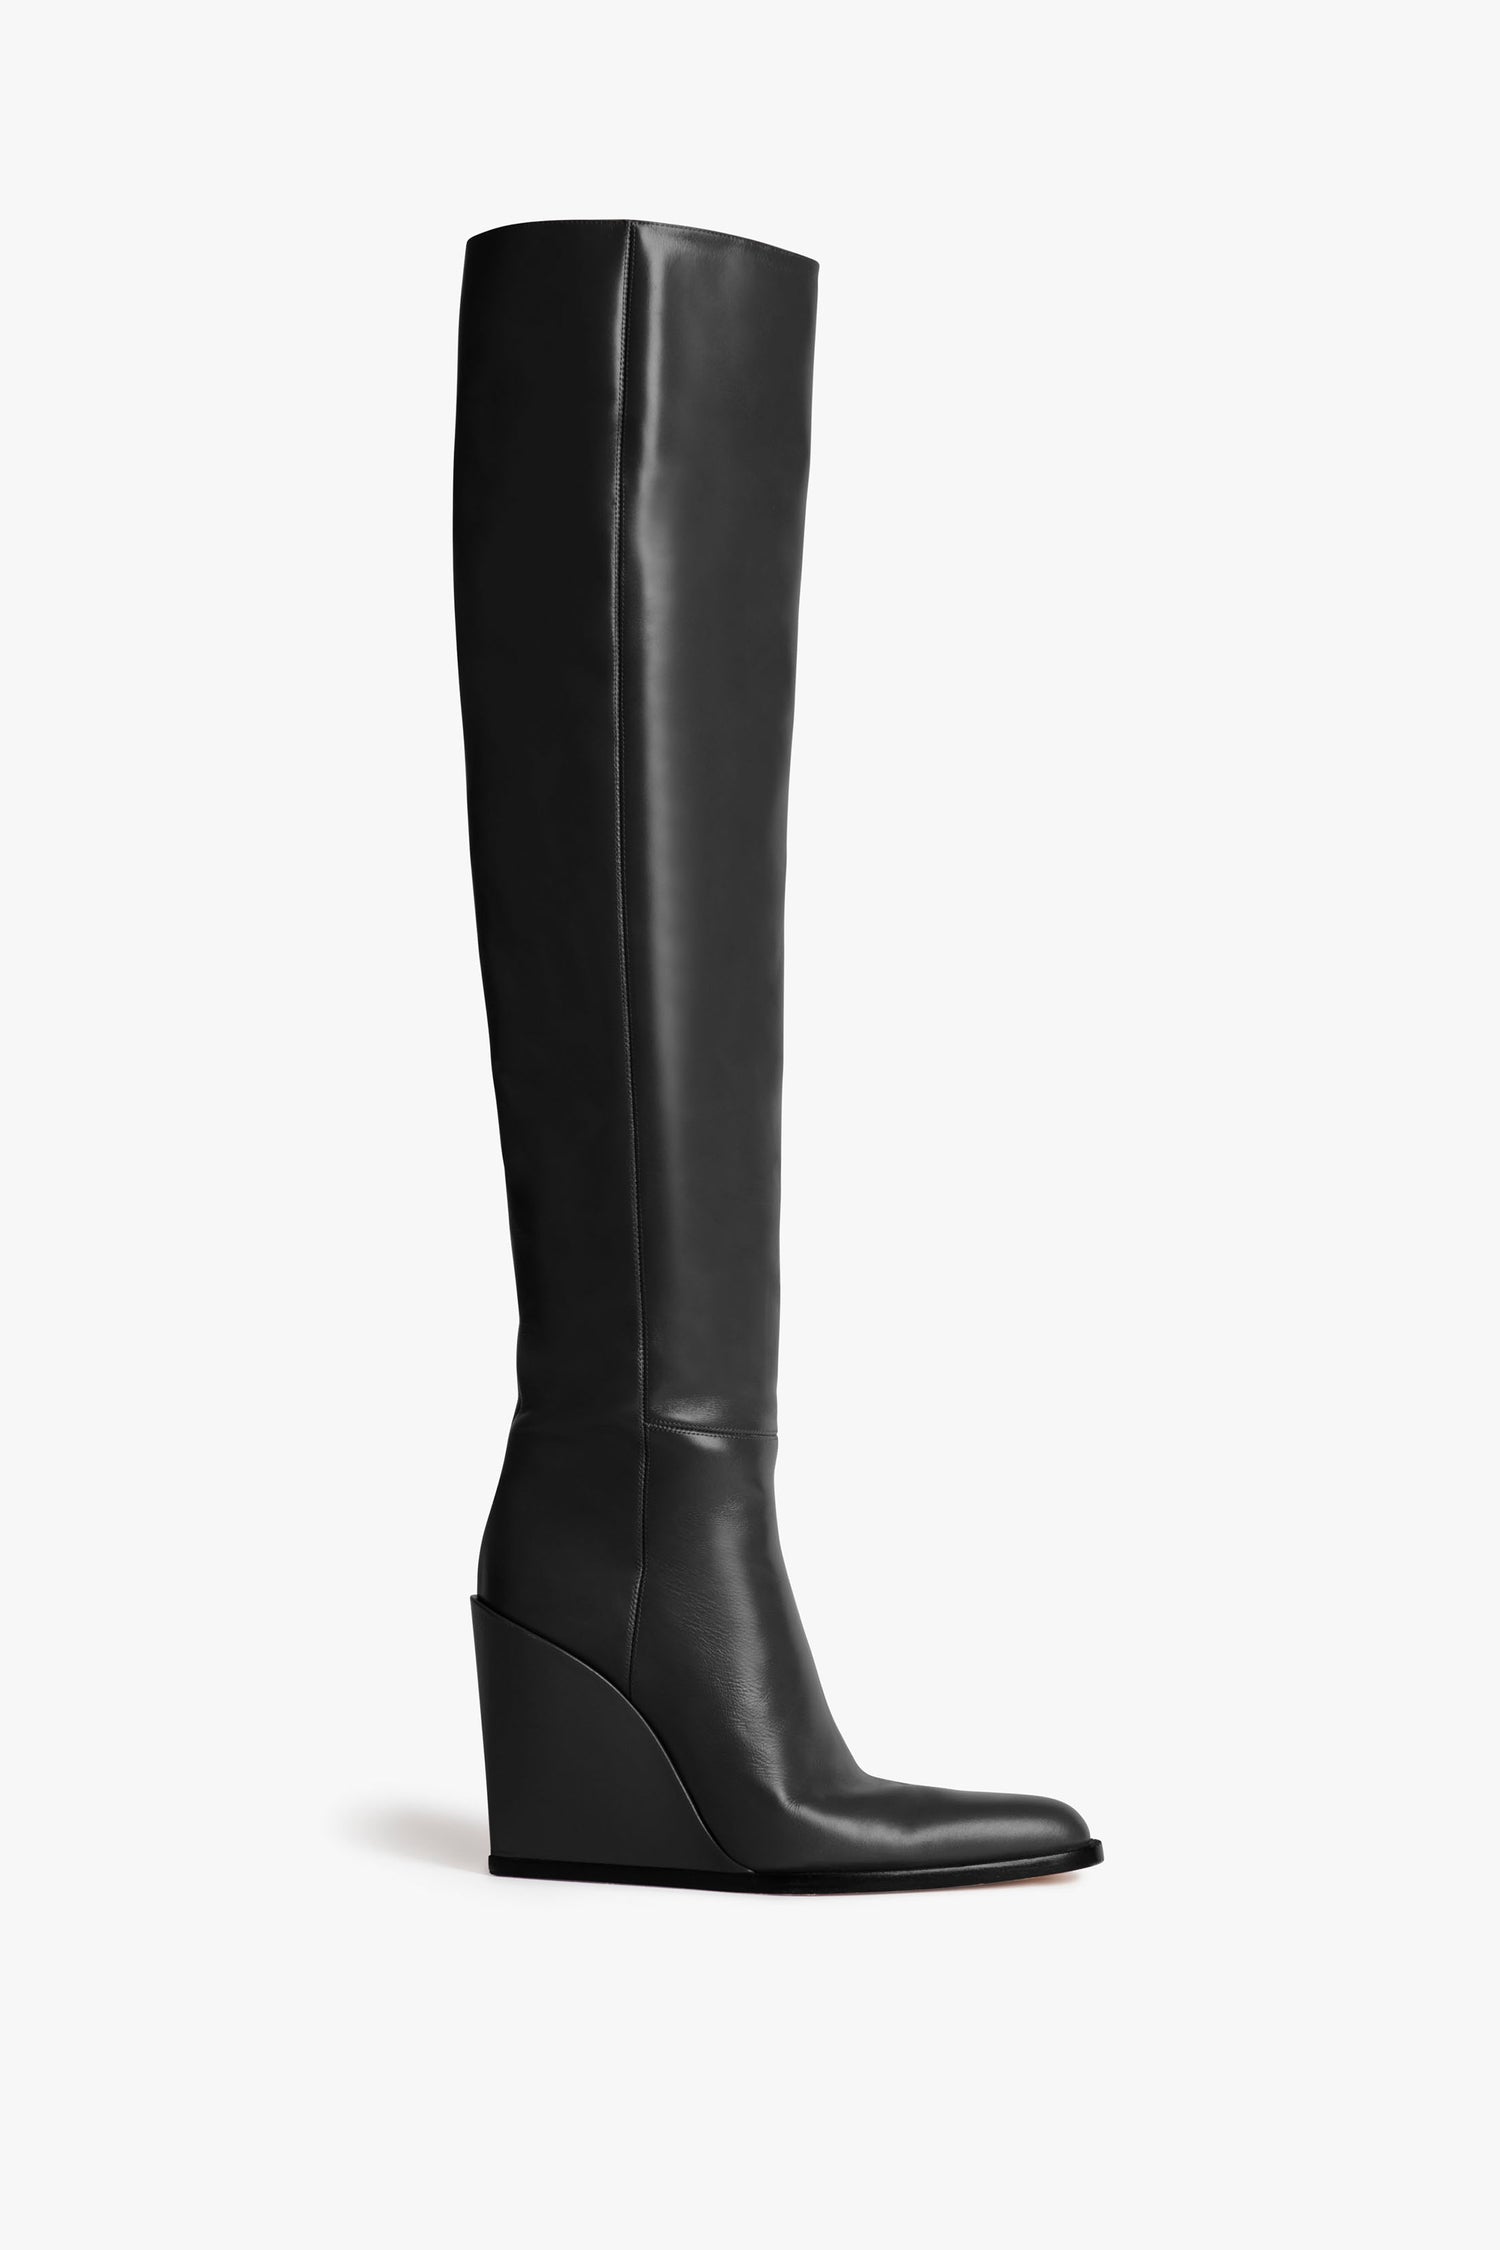 A single Sky Boot In Black by Victoria Beckham with a sculptural heel and pointed toe, crafted from stretch calf leather, is shown from the side against a plain white background.